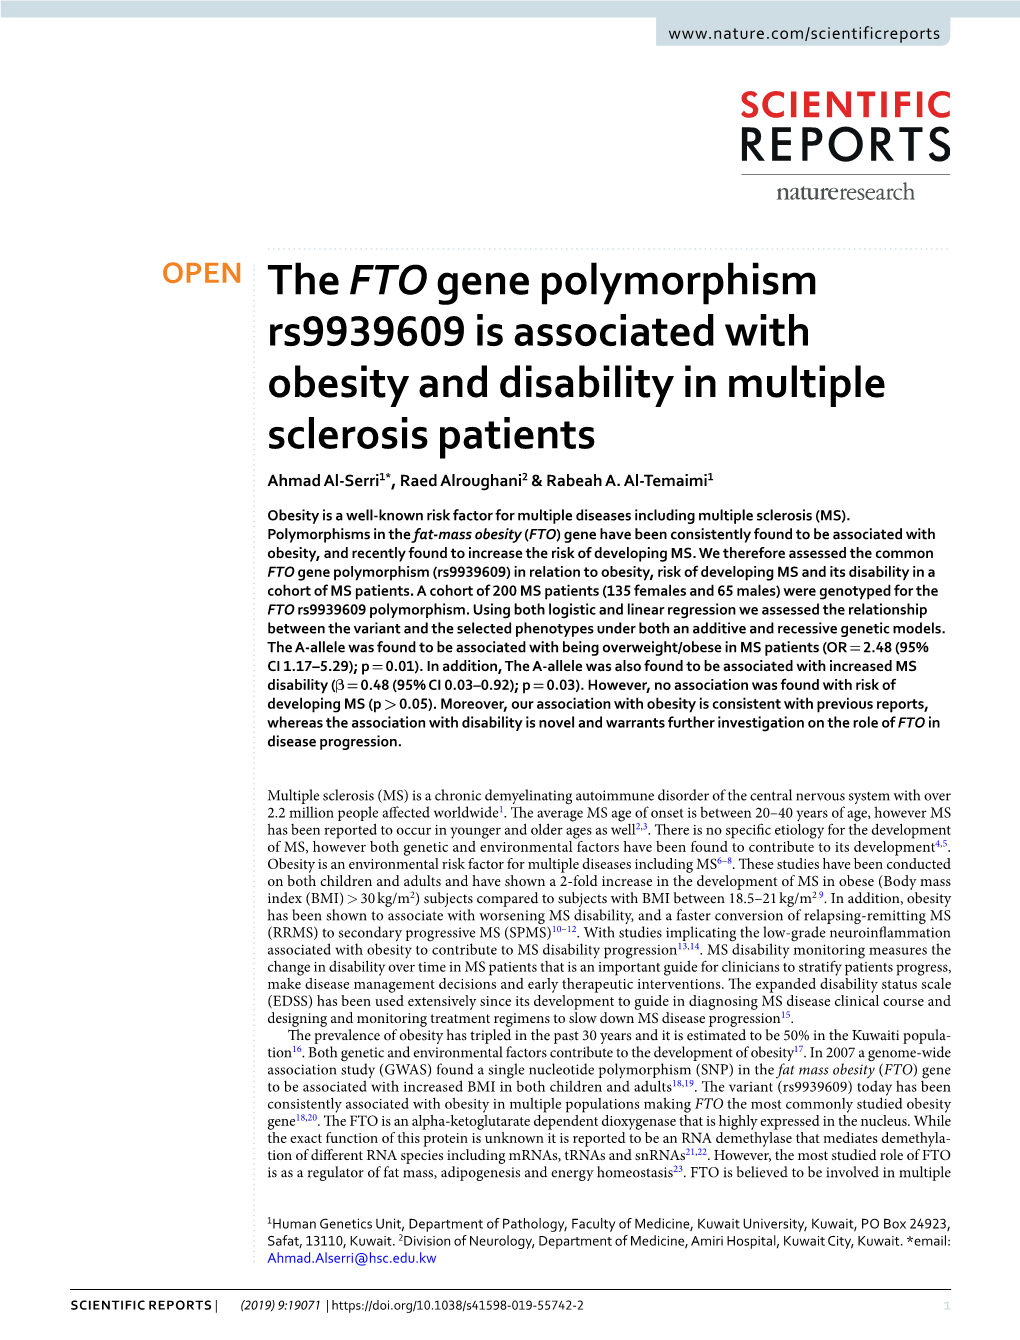 The FTO Gene Polymorphism Rs9939609 Is Associated with Obesity and Disability in Multiple Sclerosis Patients Ahmad Al-Serri1*, Raed Alroughani2 & Rabeah A